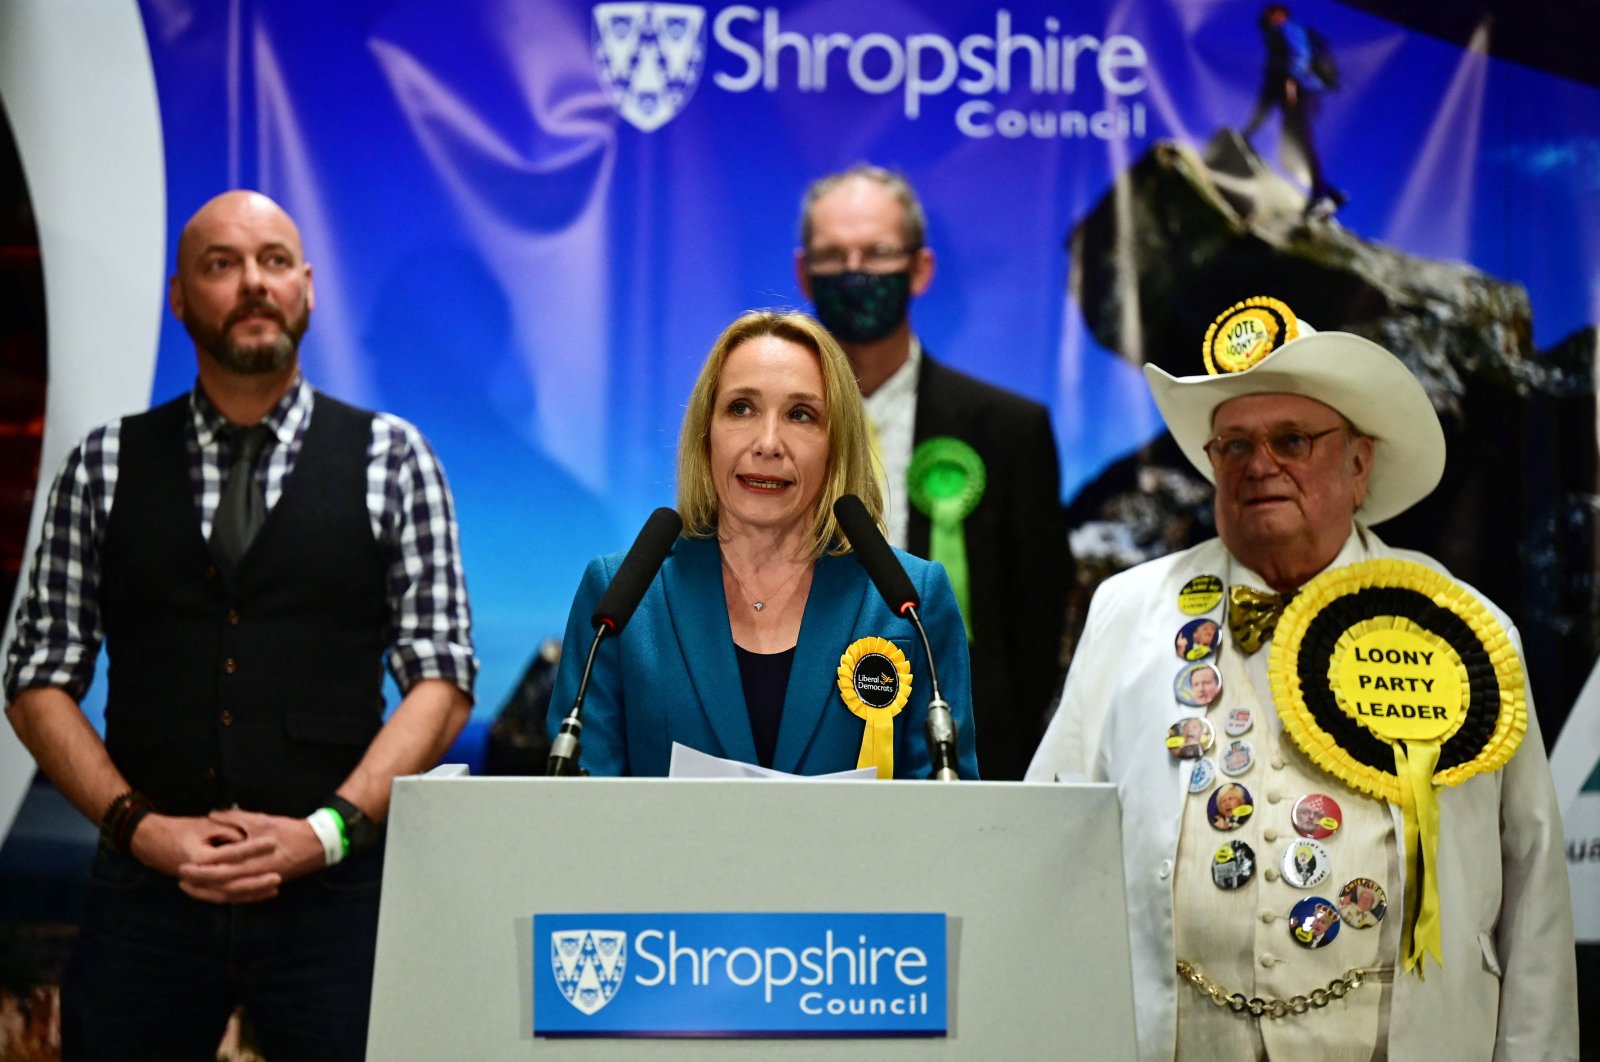 Liberal Democrat candidate Helen Morgan speaks after being elected as Member of Parliament for North Shropshire at the by-election count center in Shrewsbury, England, Dec. 17, 2021. (AFP Photo)